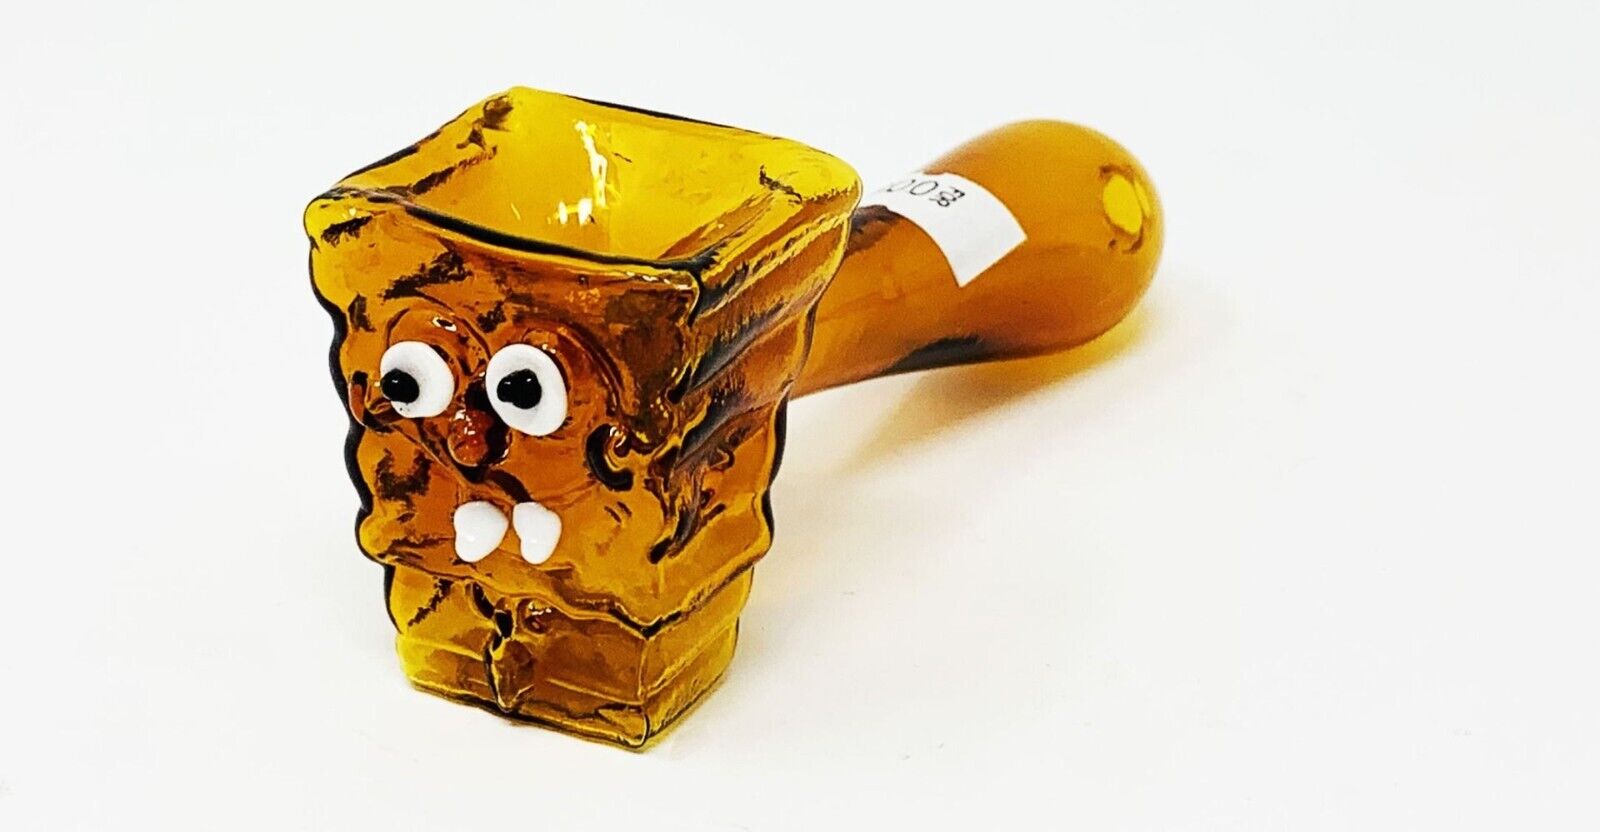 Sponge Bob Cartoon Movie Comic Amber Pipe Bong Tobacco Smoking Glass Bowl. Available Now for 11.99